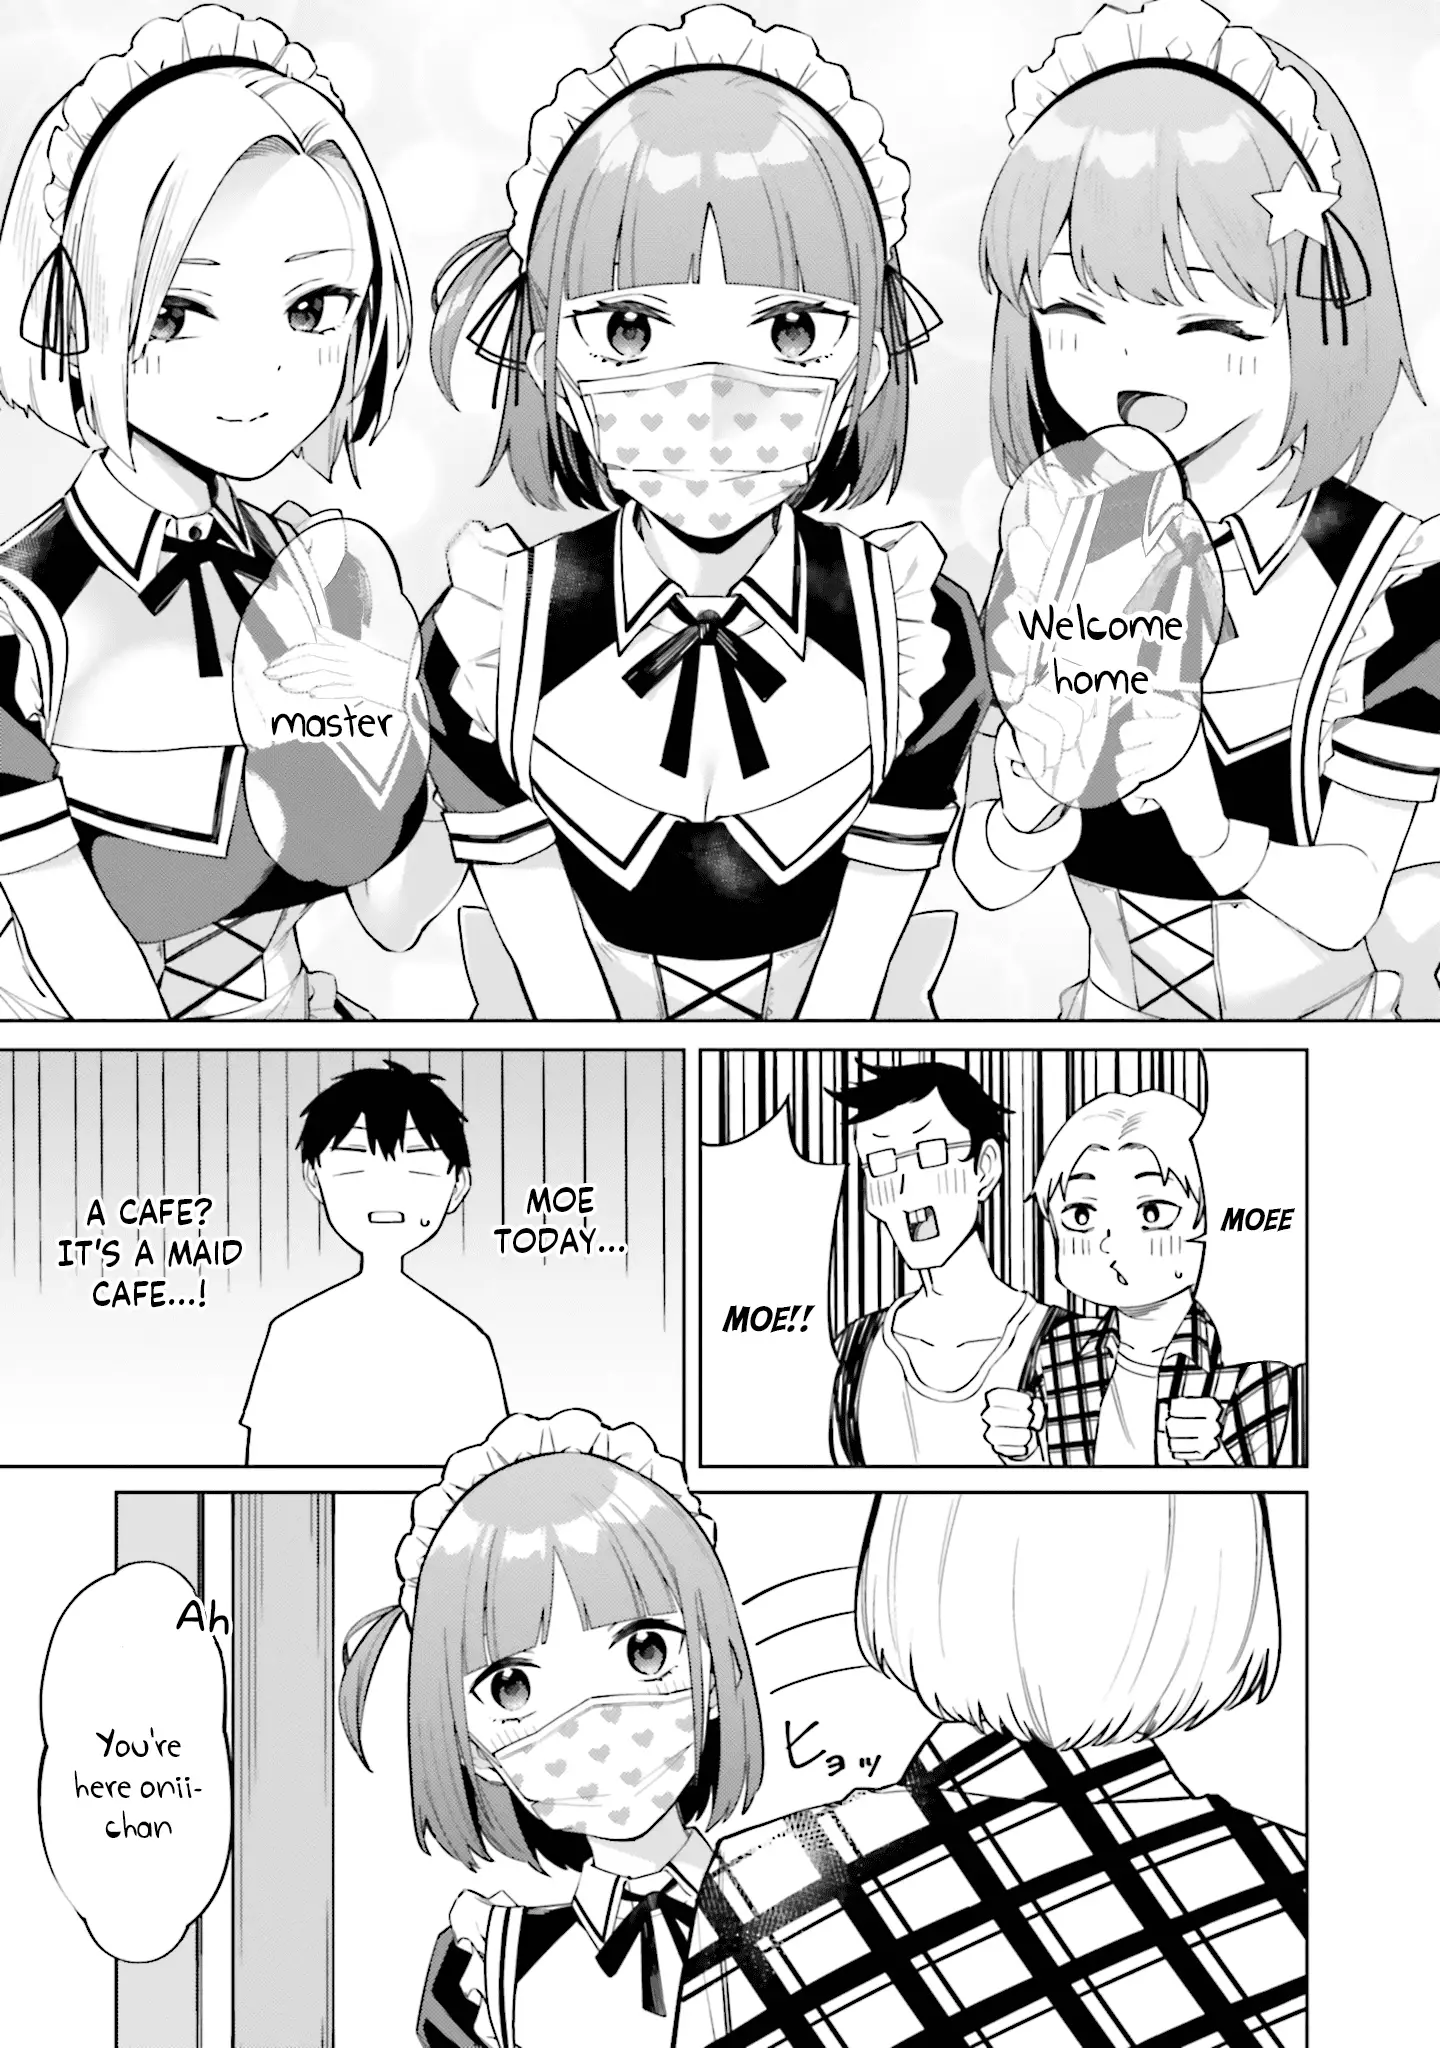 I Don't Understand Shirogane-San's Facial Expression At All - 15 page 10-161e7214